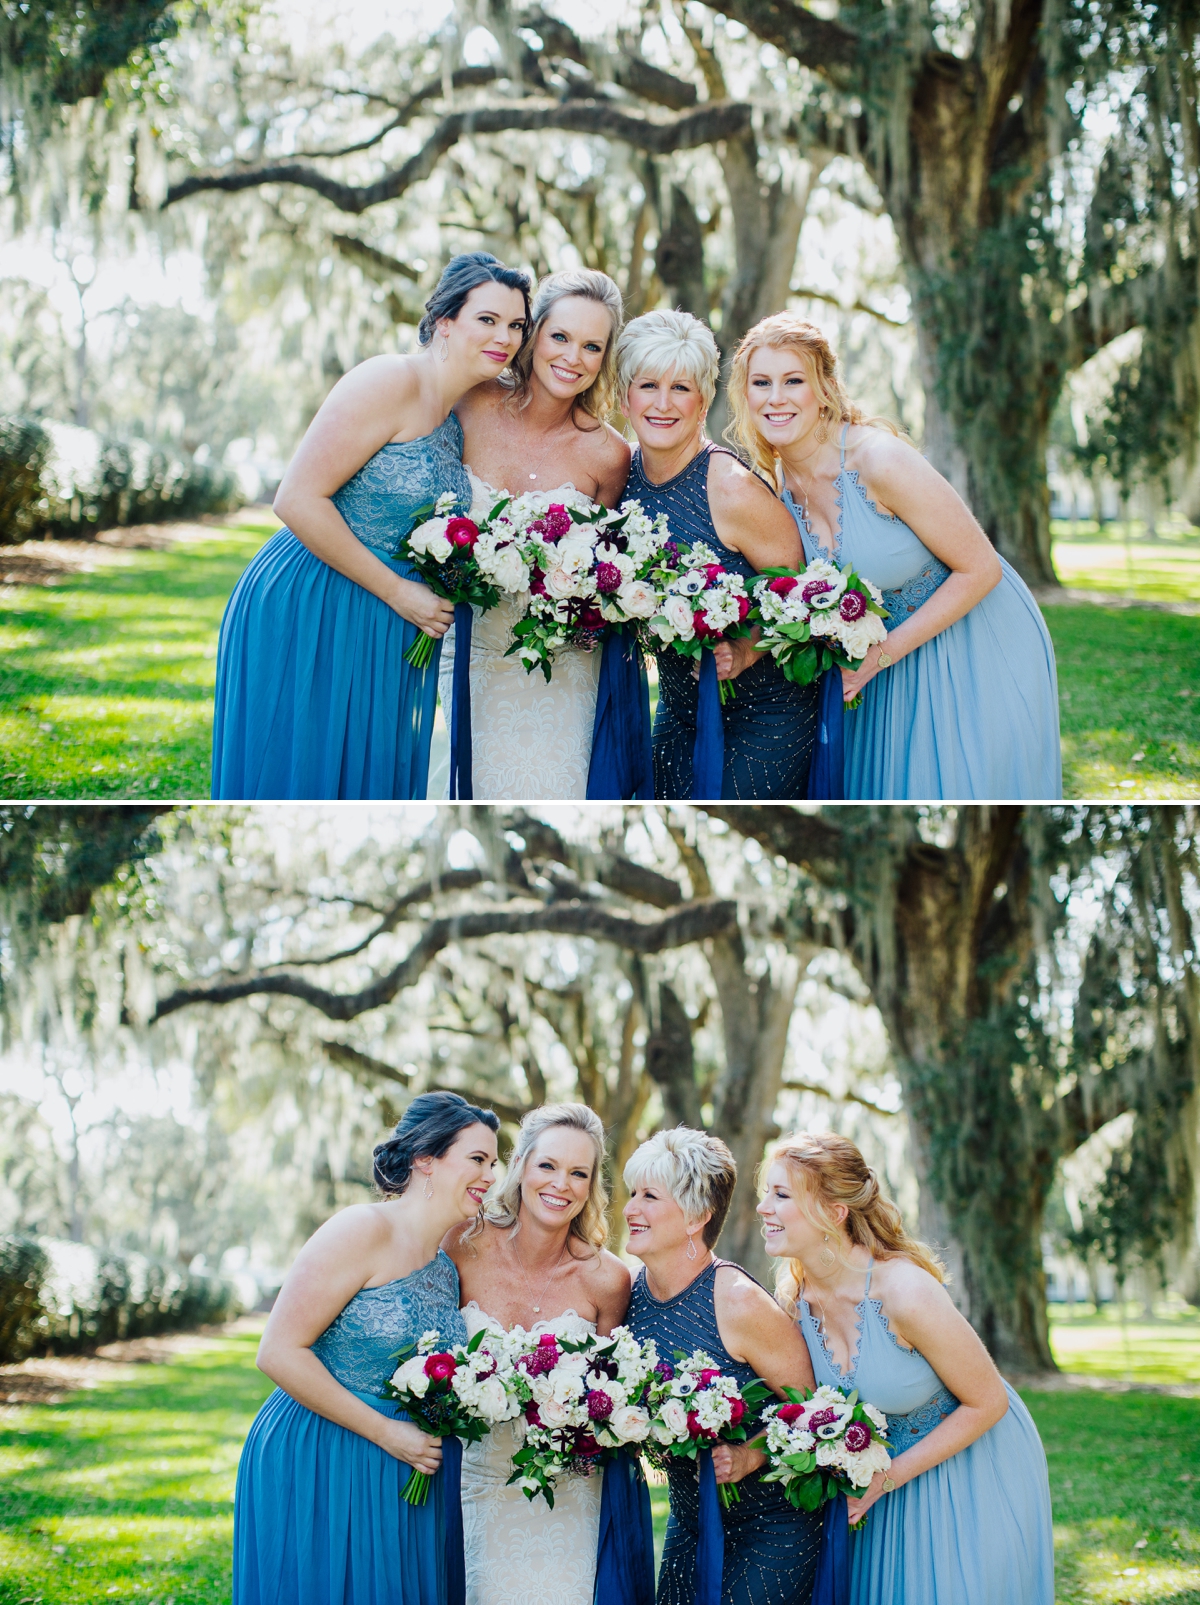 Bridesmaids in blue gowns with white and red flowers